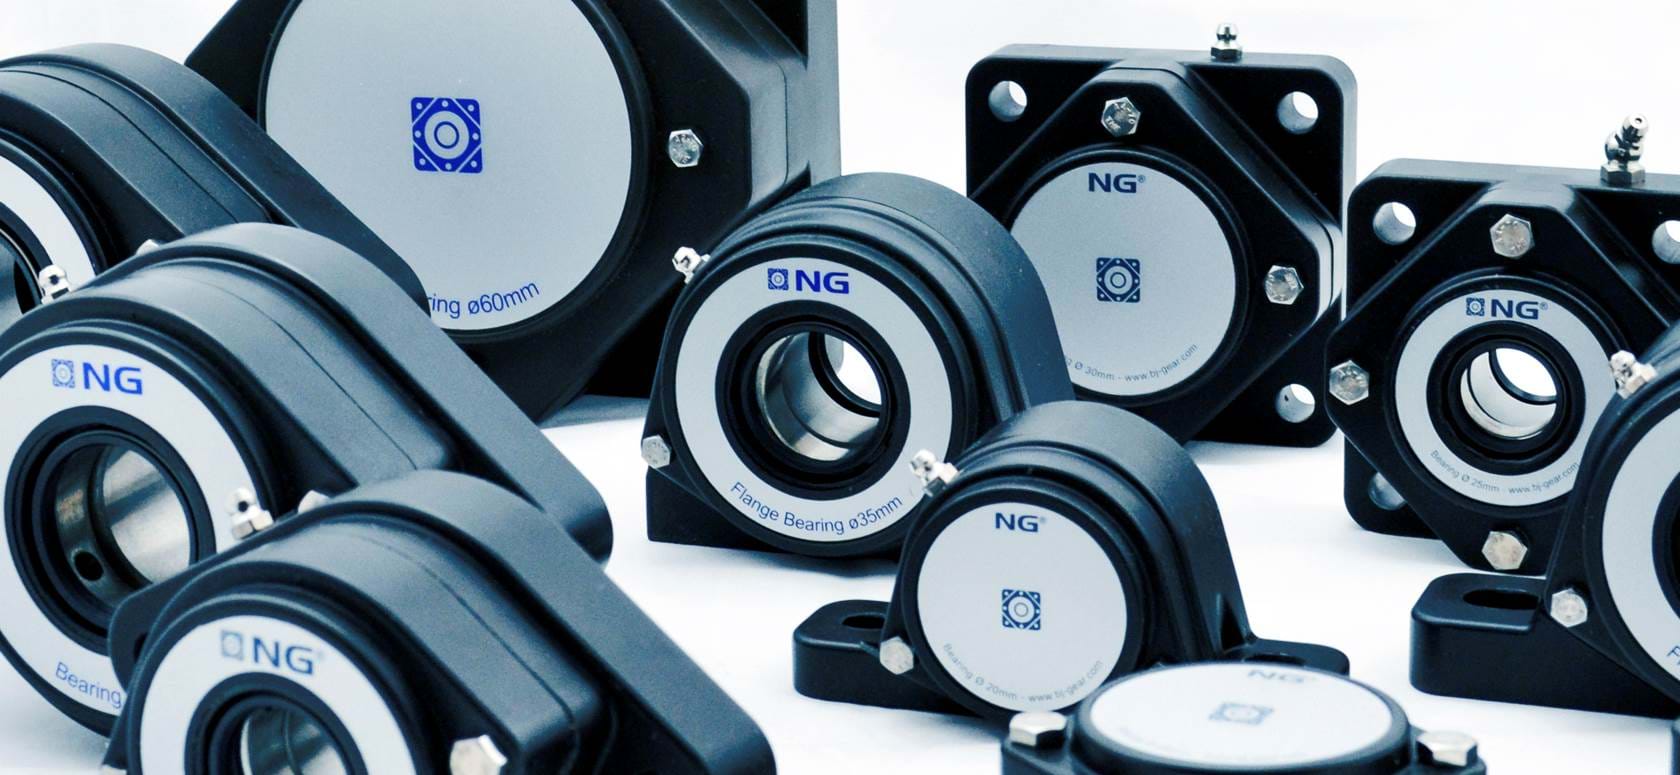 Many different kinds of NG bearings